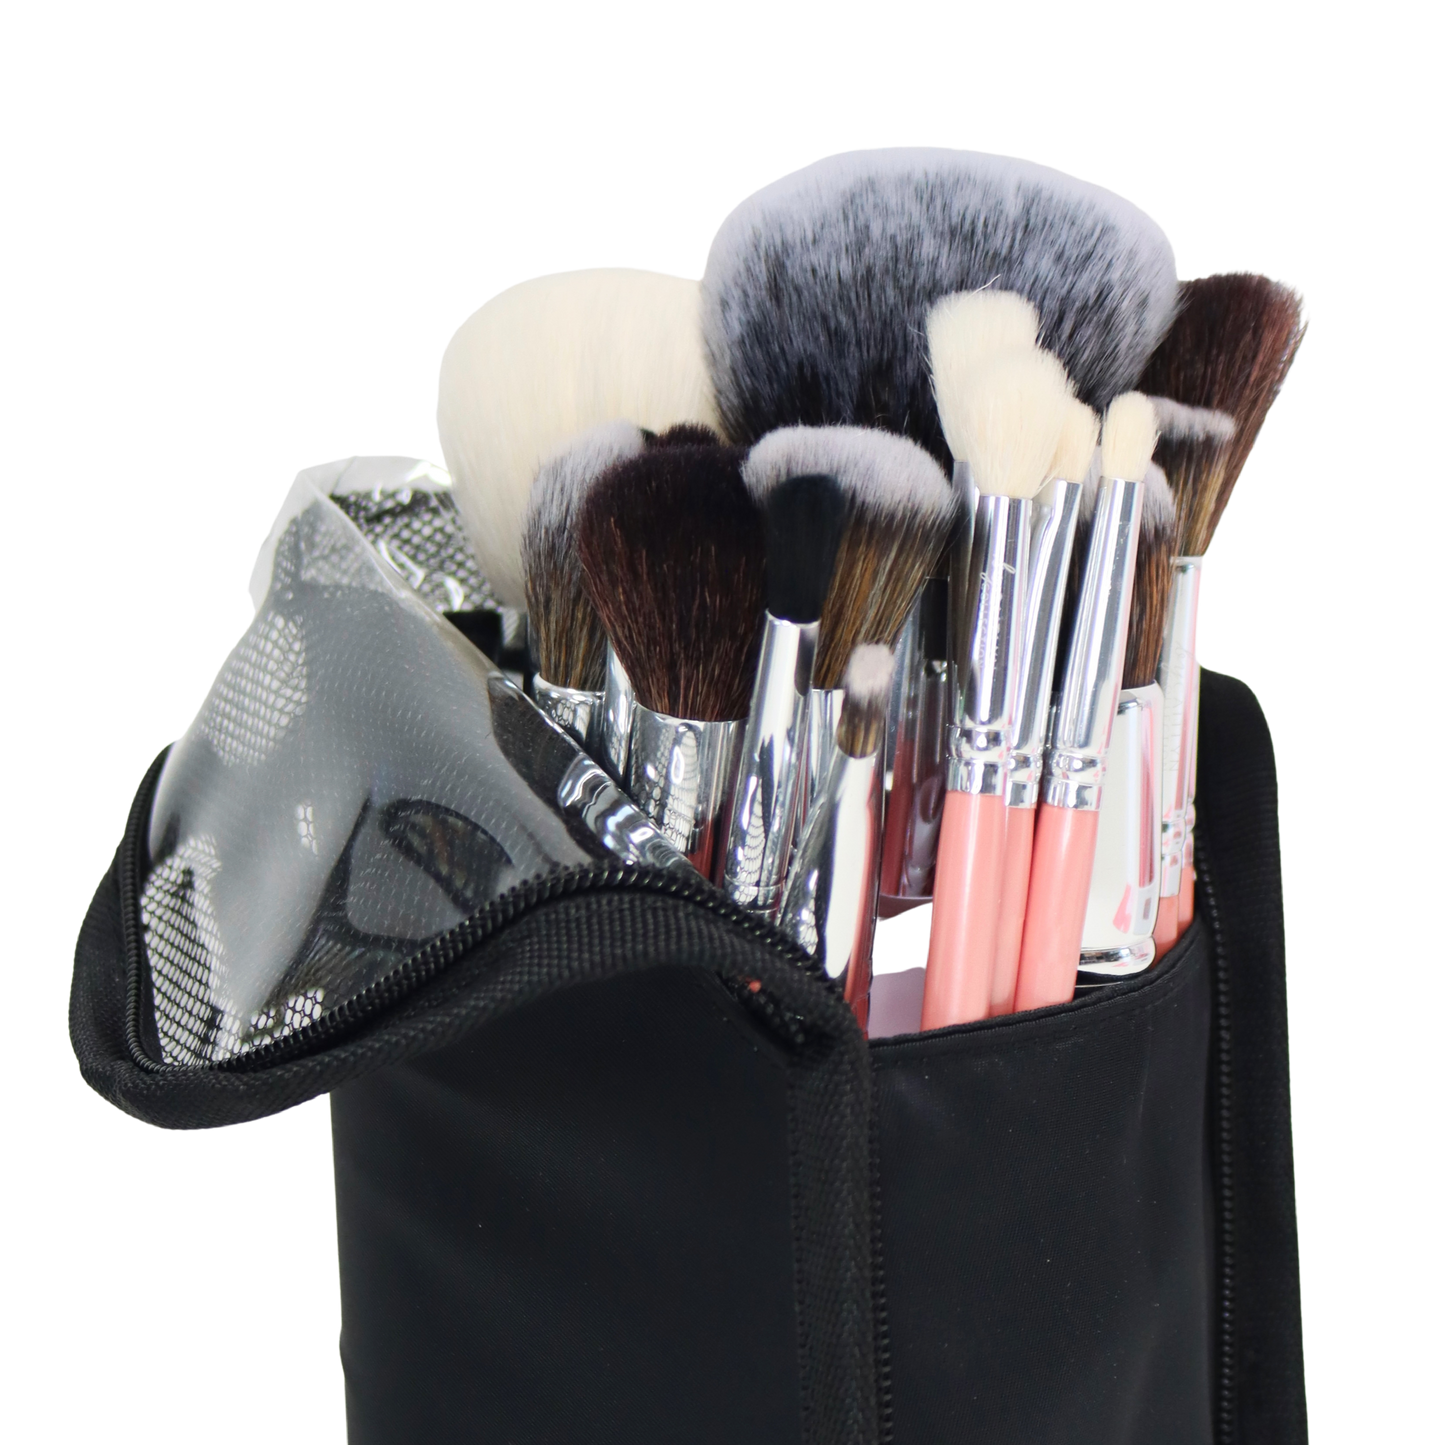 Large Stand Up Makeup Brush Case